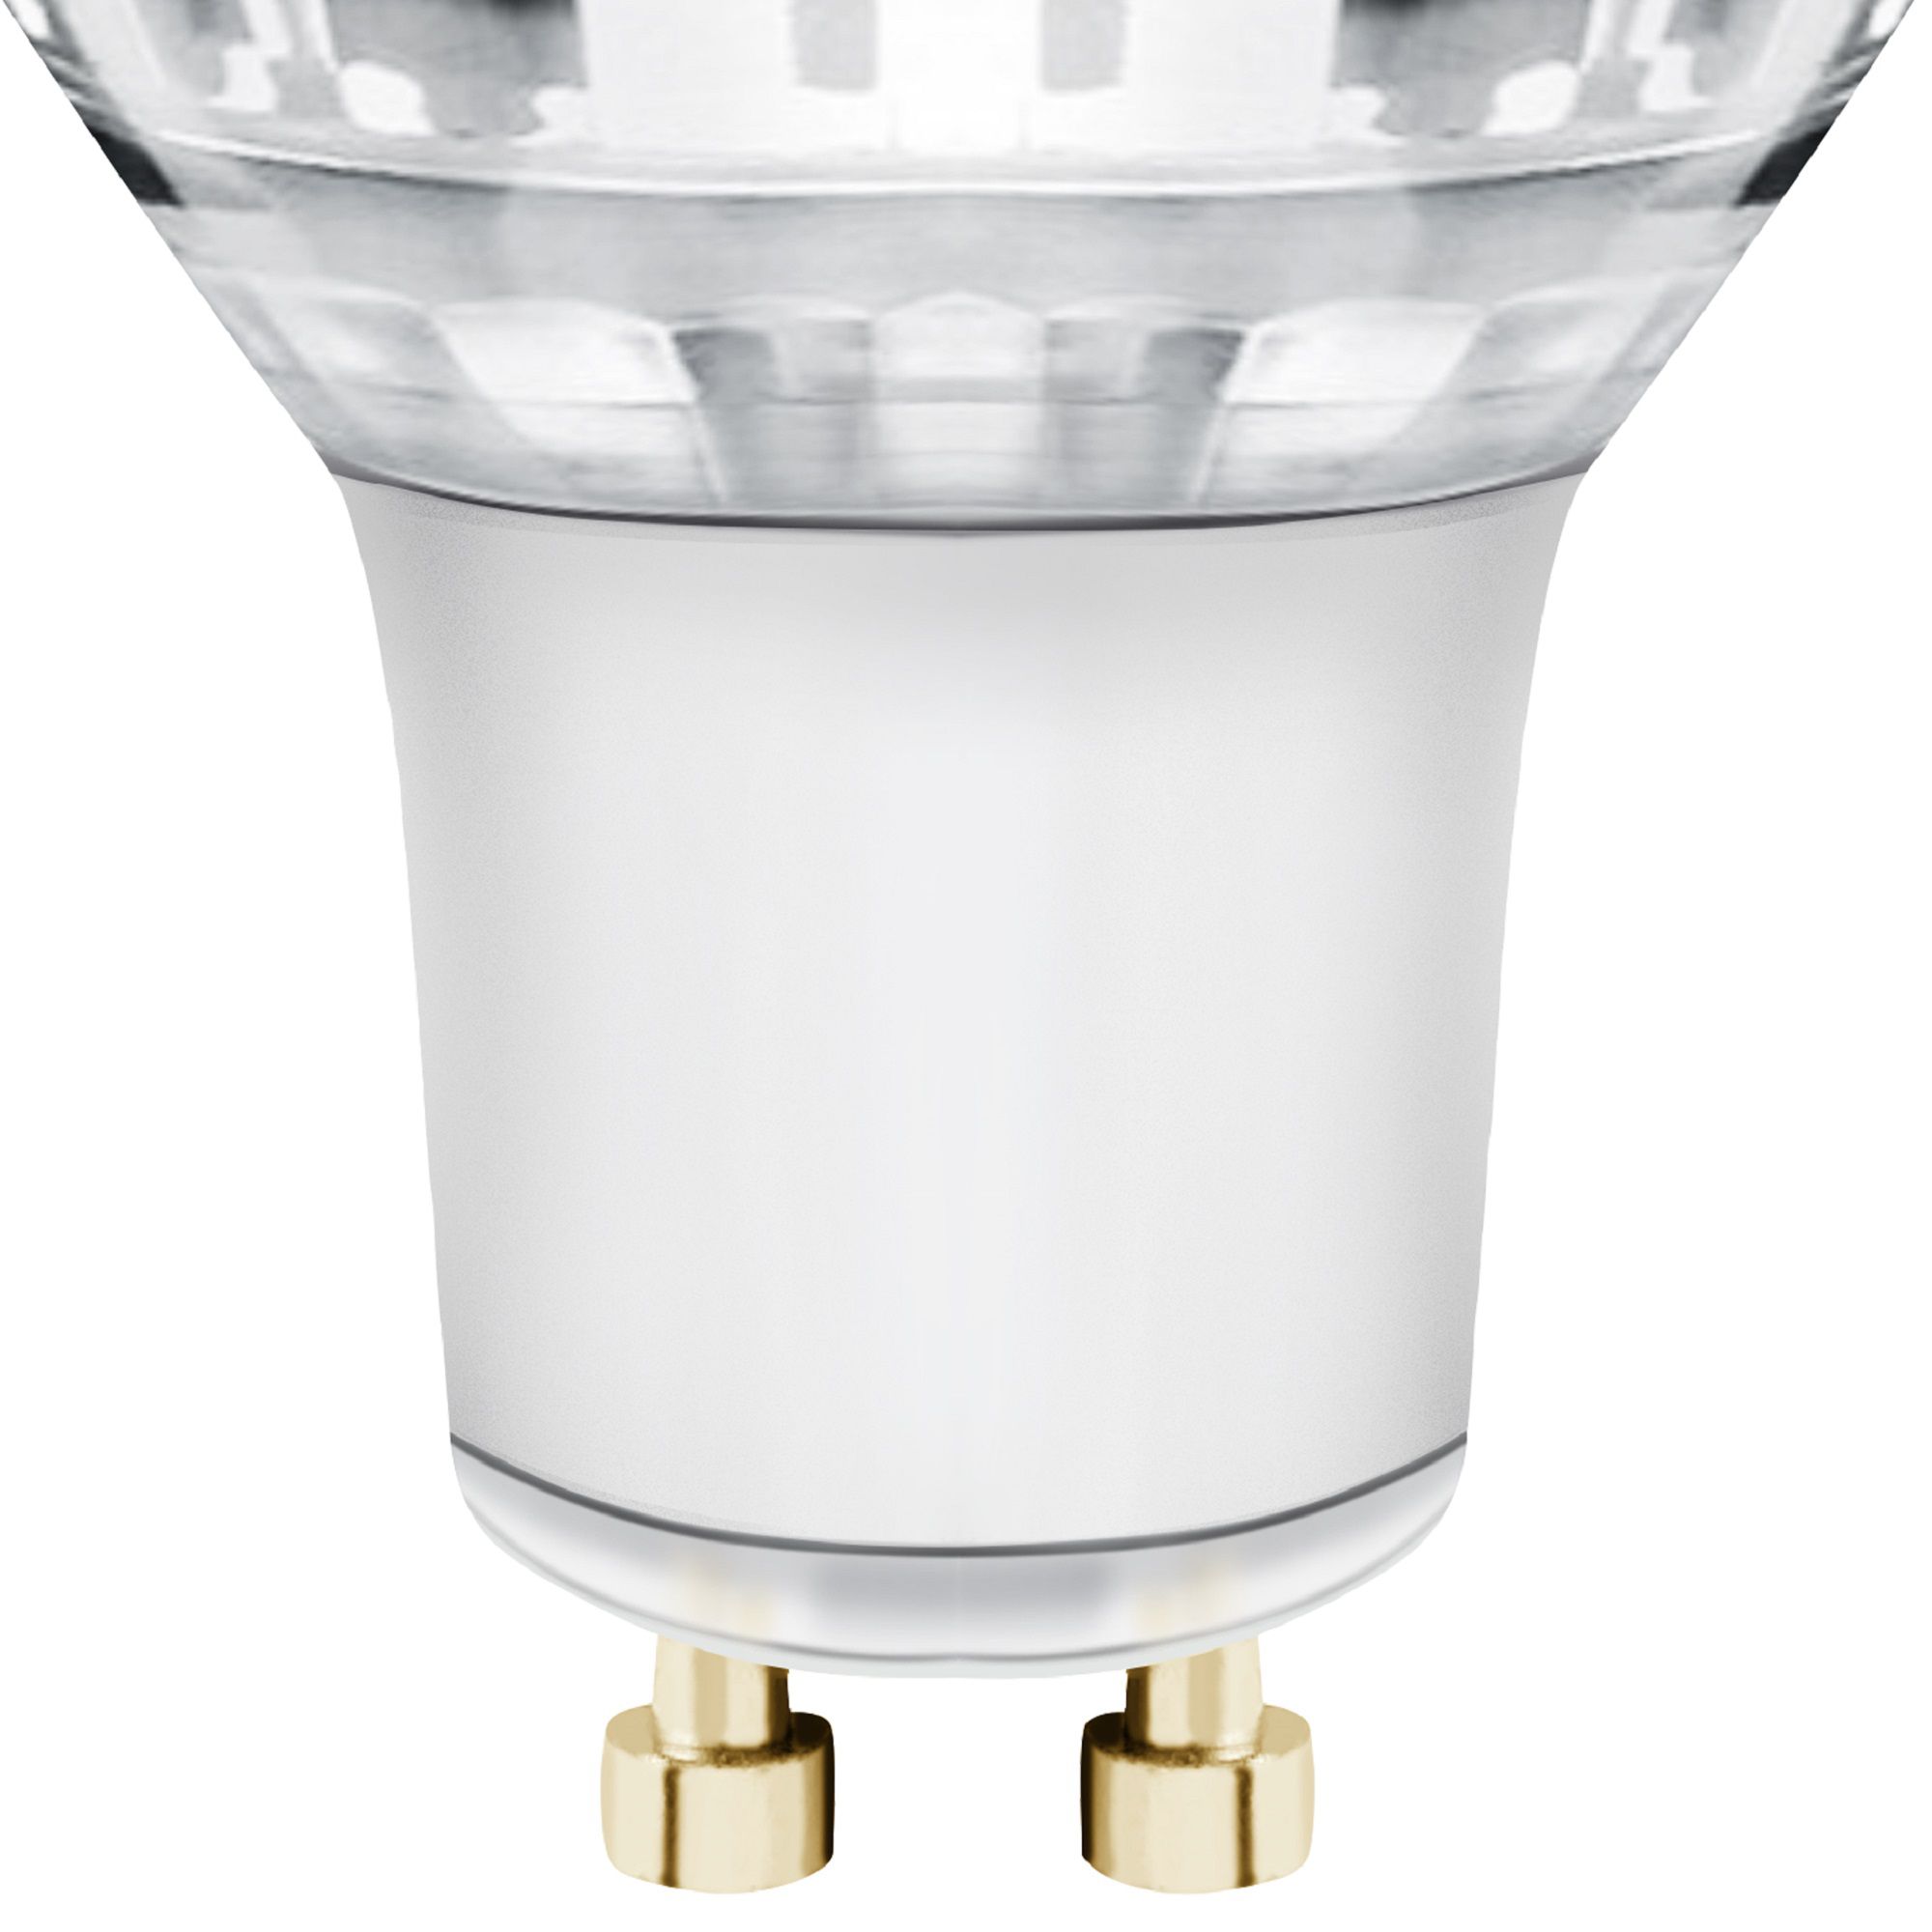 Diall GU10 | DIY bulb, Pack 3 LED Dimmable of Light 345lm Reflector at 4.5W Warm B&Q white